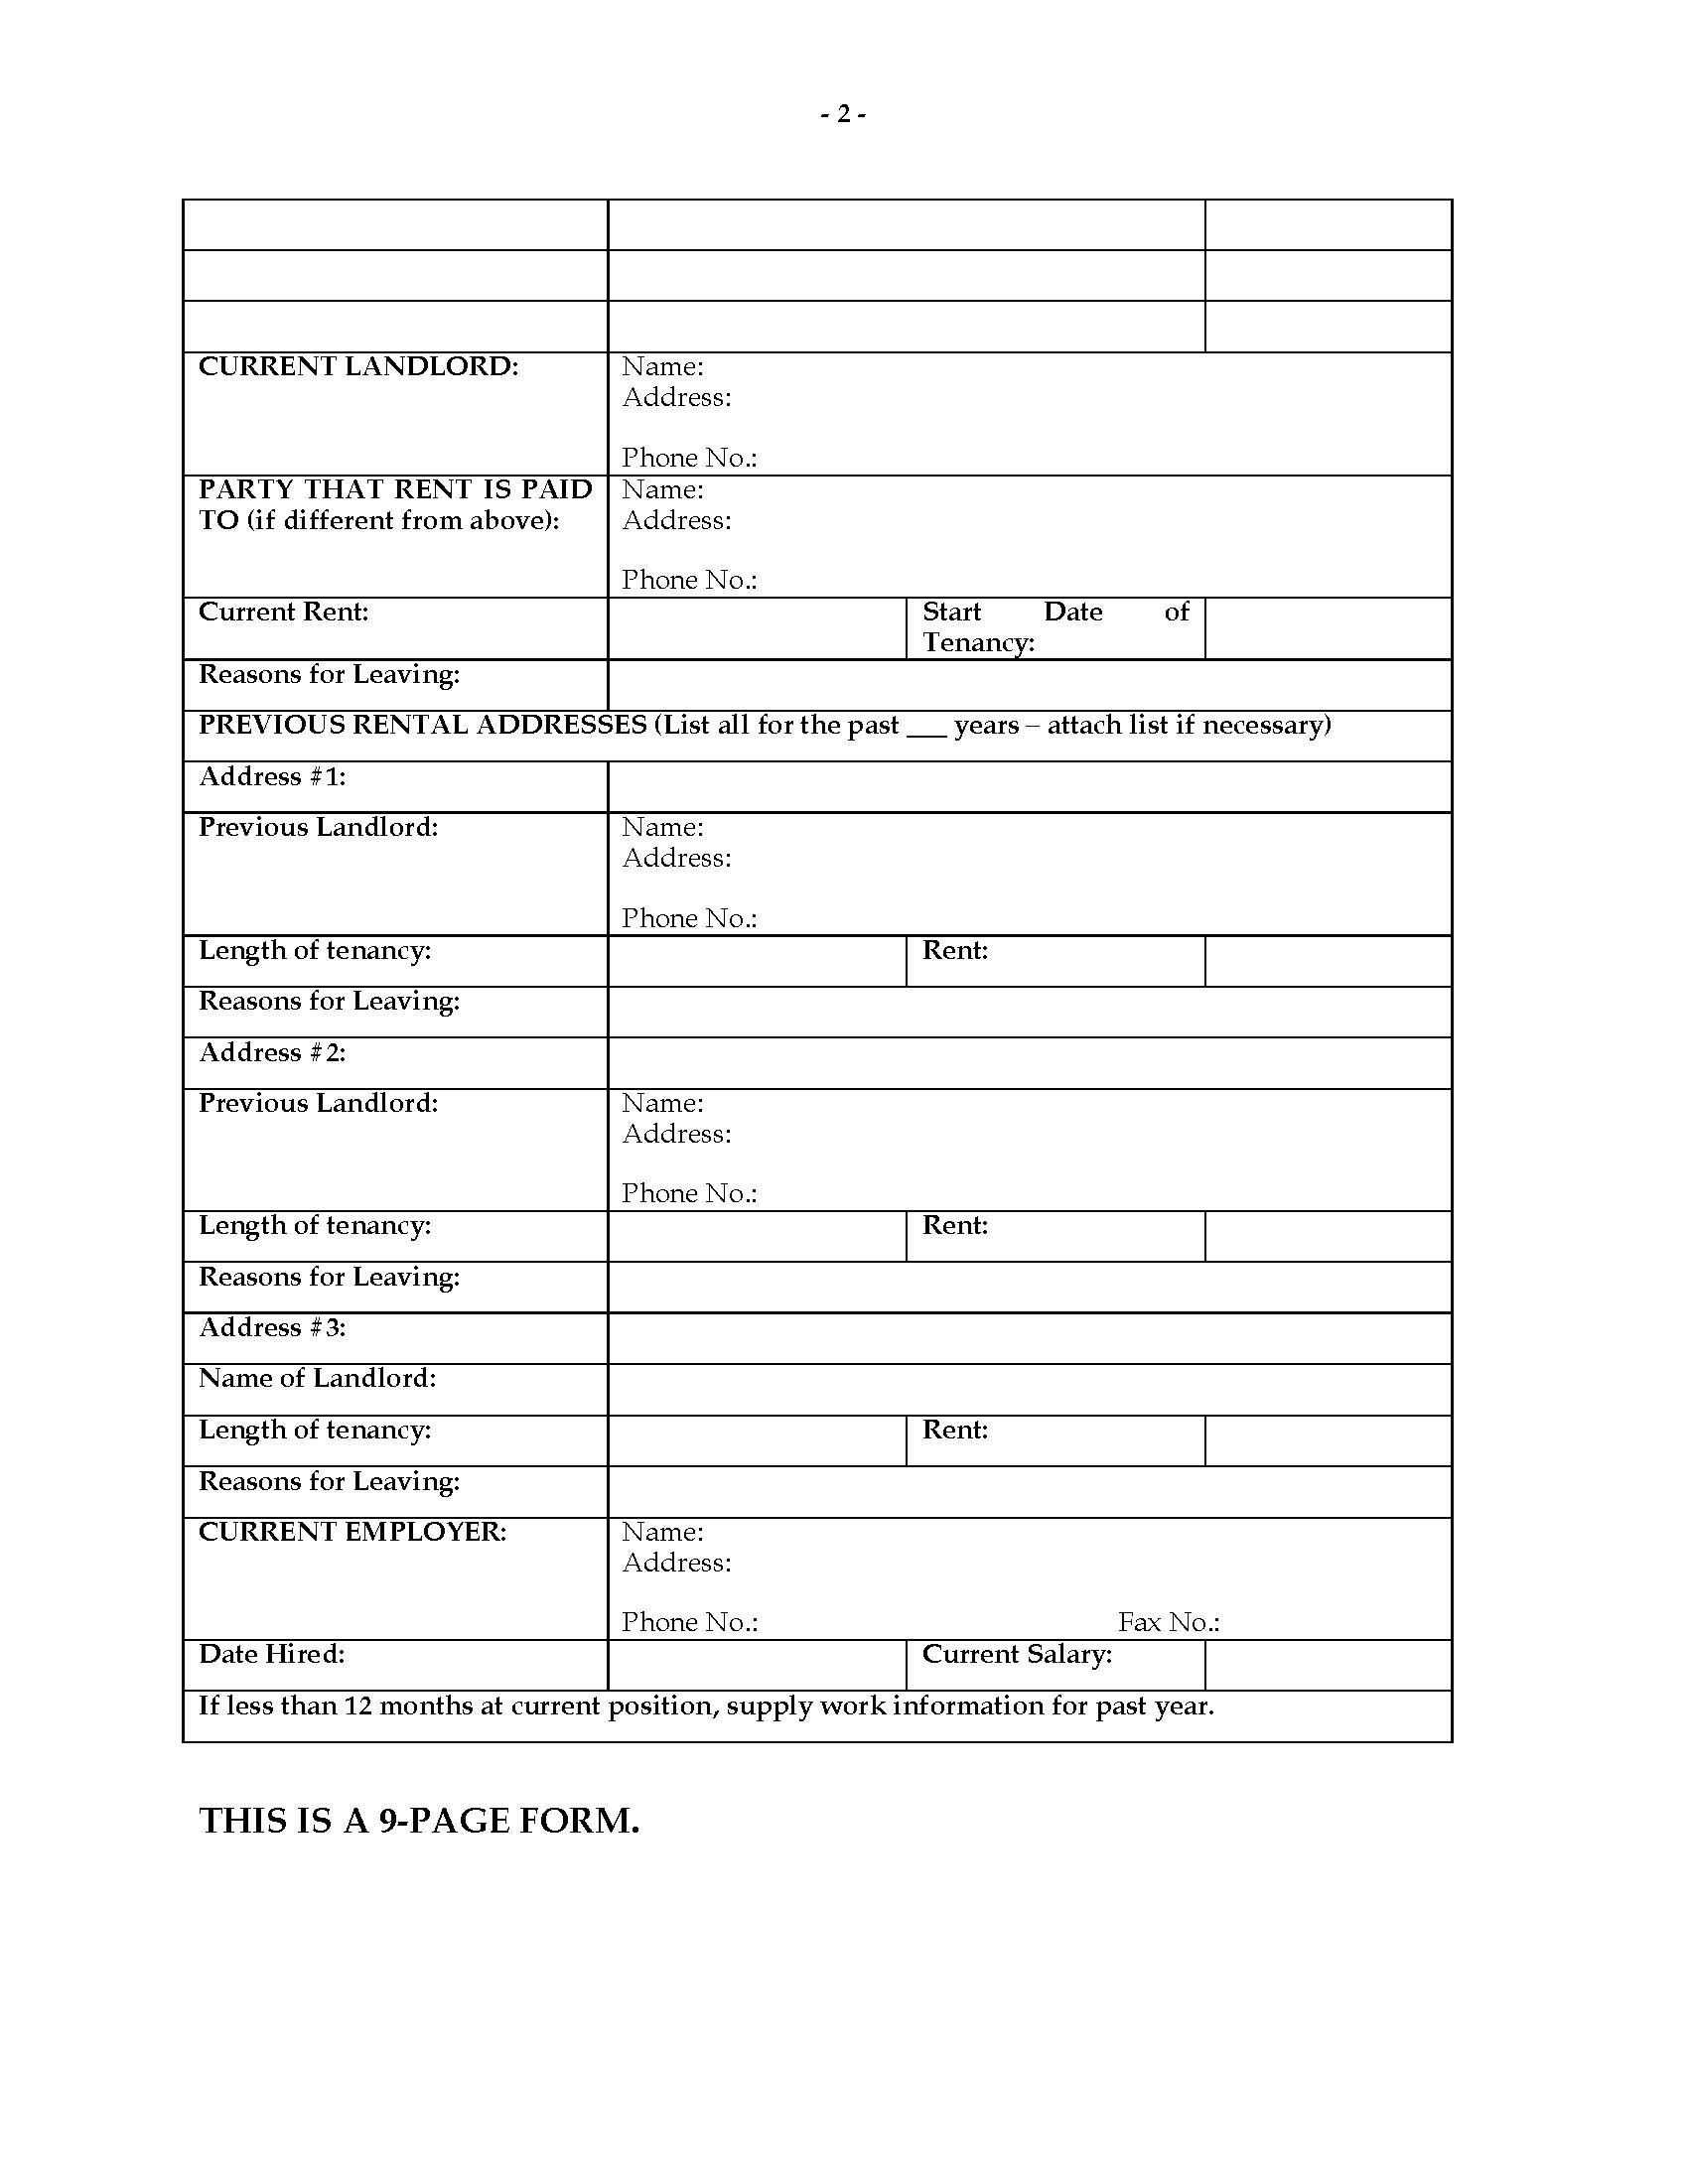 tennessee-rental-application-form-legal-forms-and-business-templates